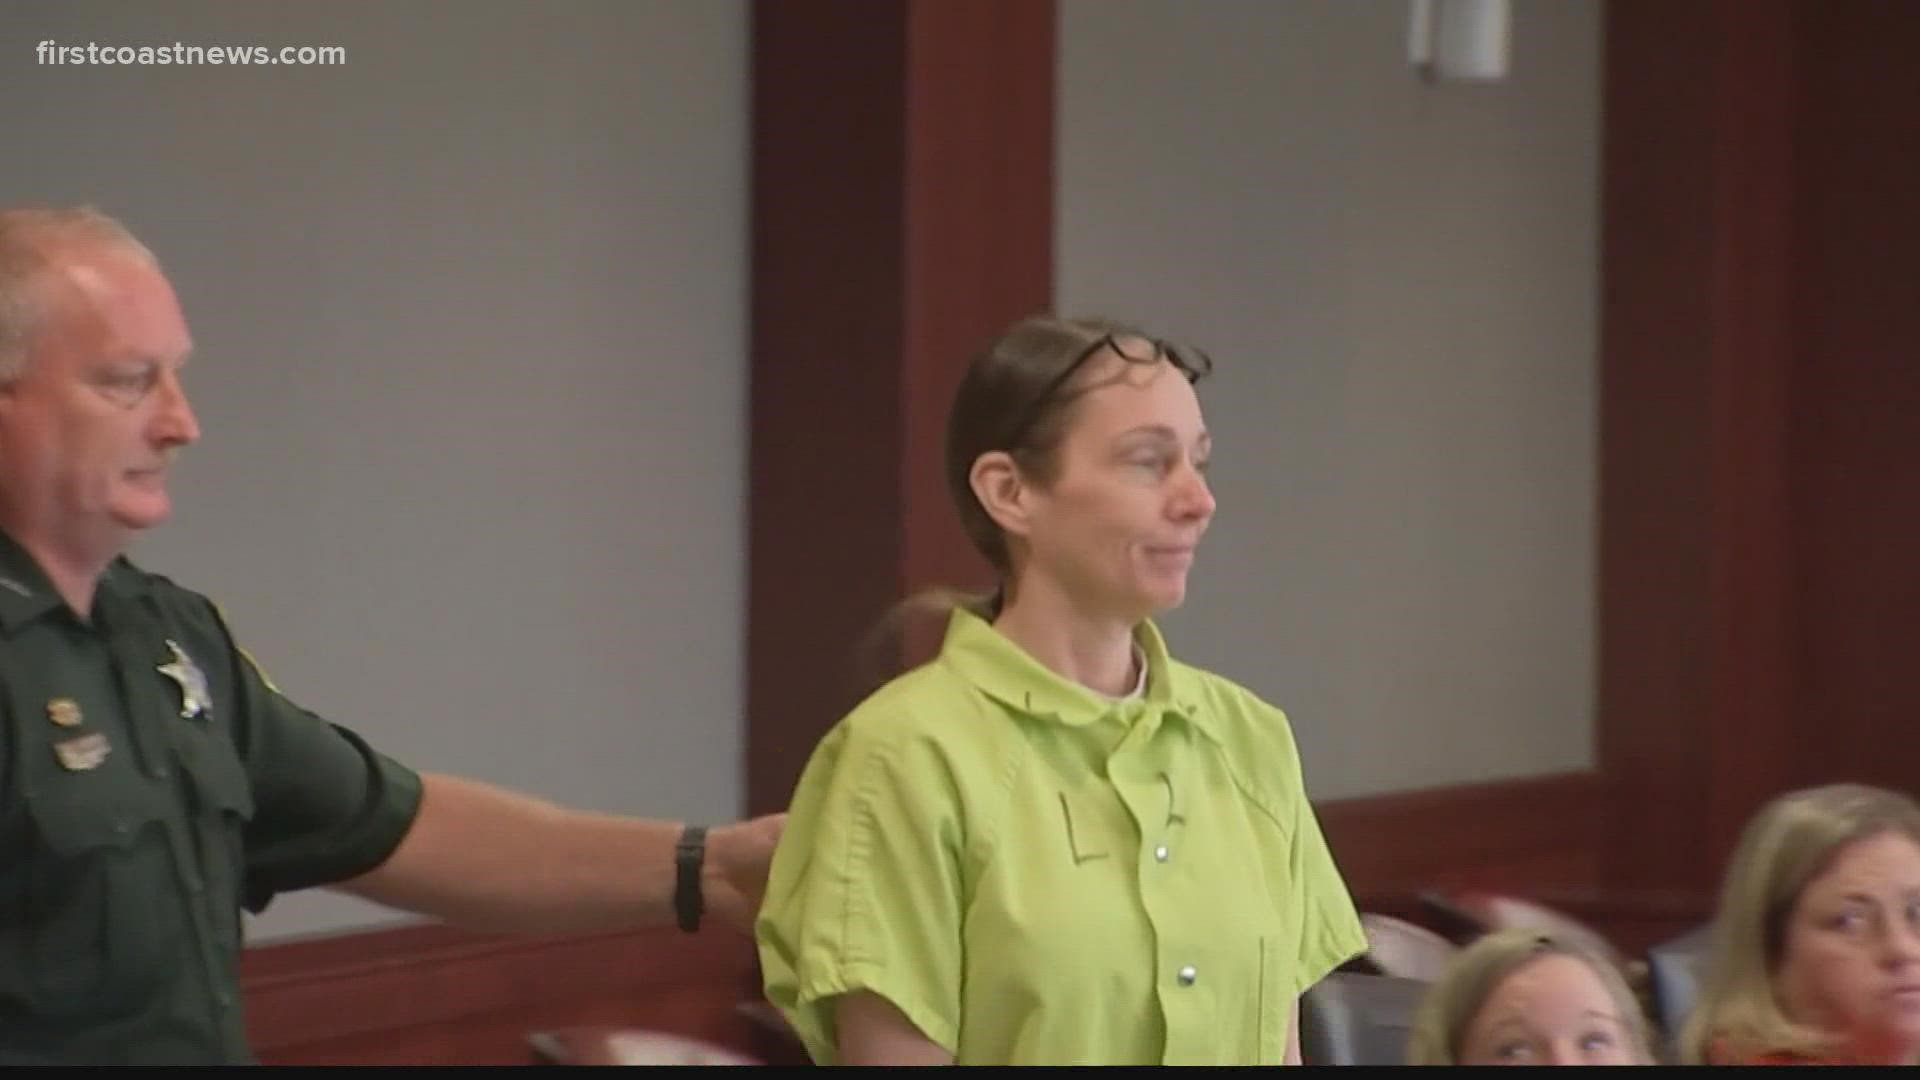 There were 600 potential jurors summoned for the court to narrow down to a pool of 60 in the trial for Kimberly Kessler, accused of murdering Joleen Cummings.